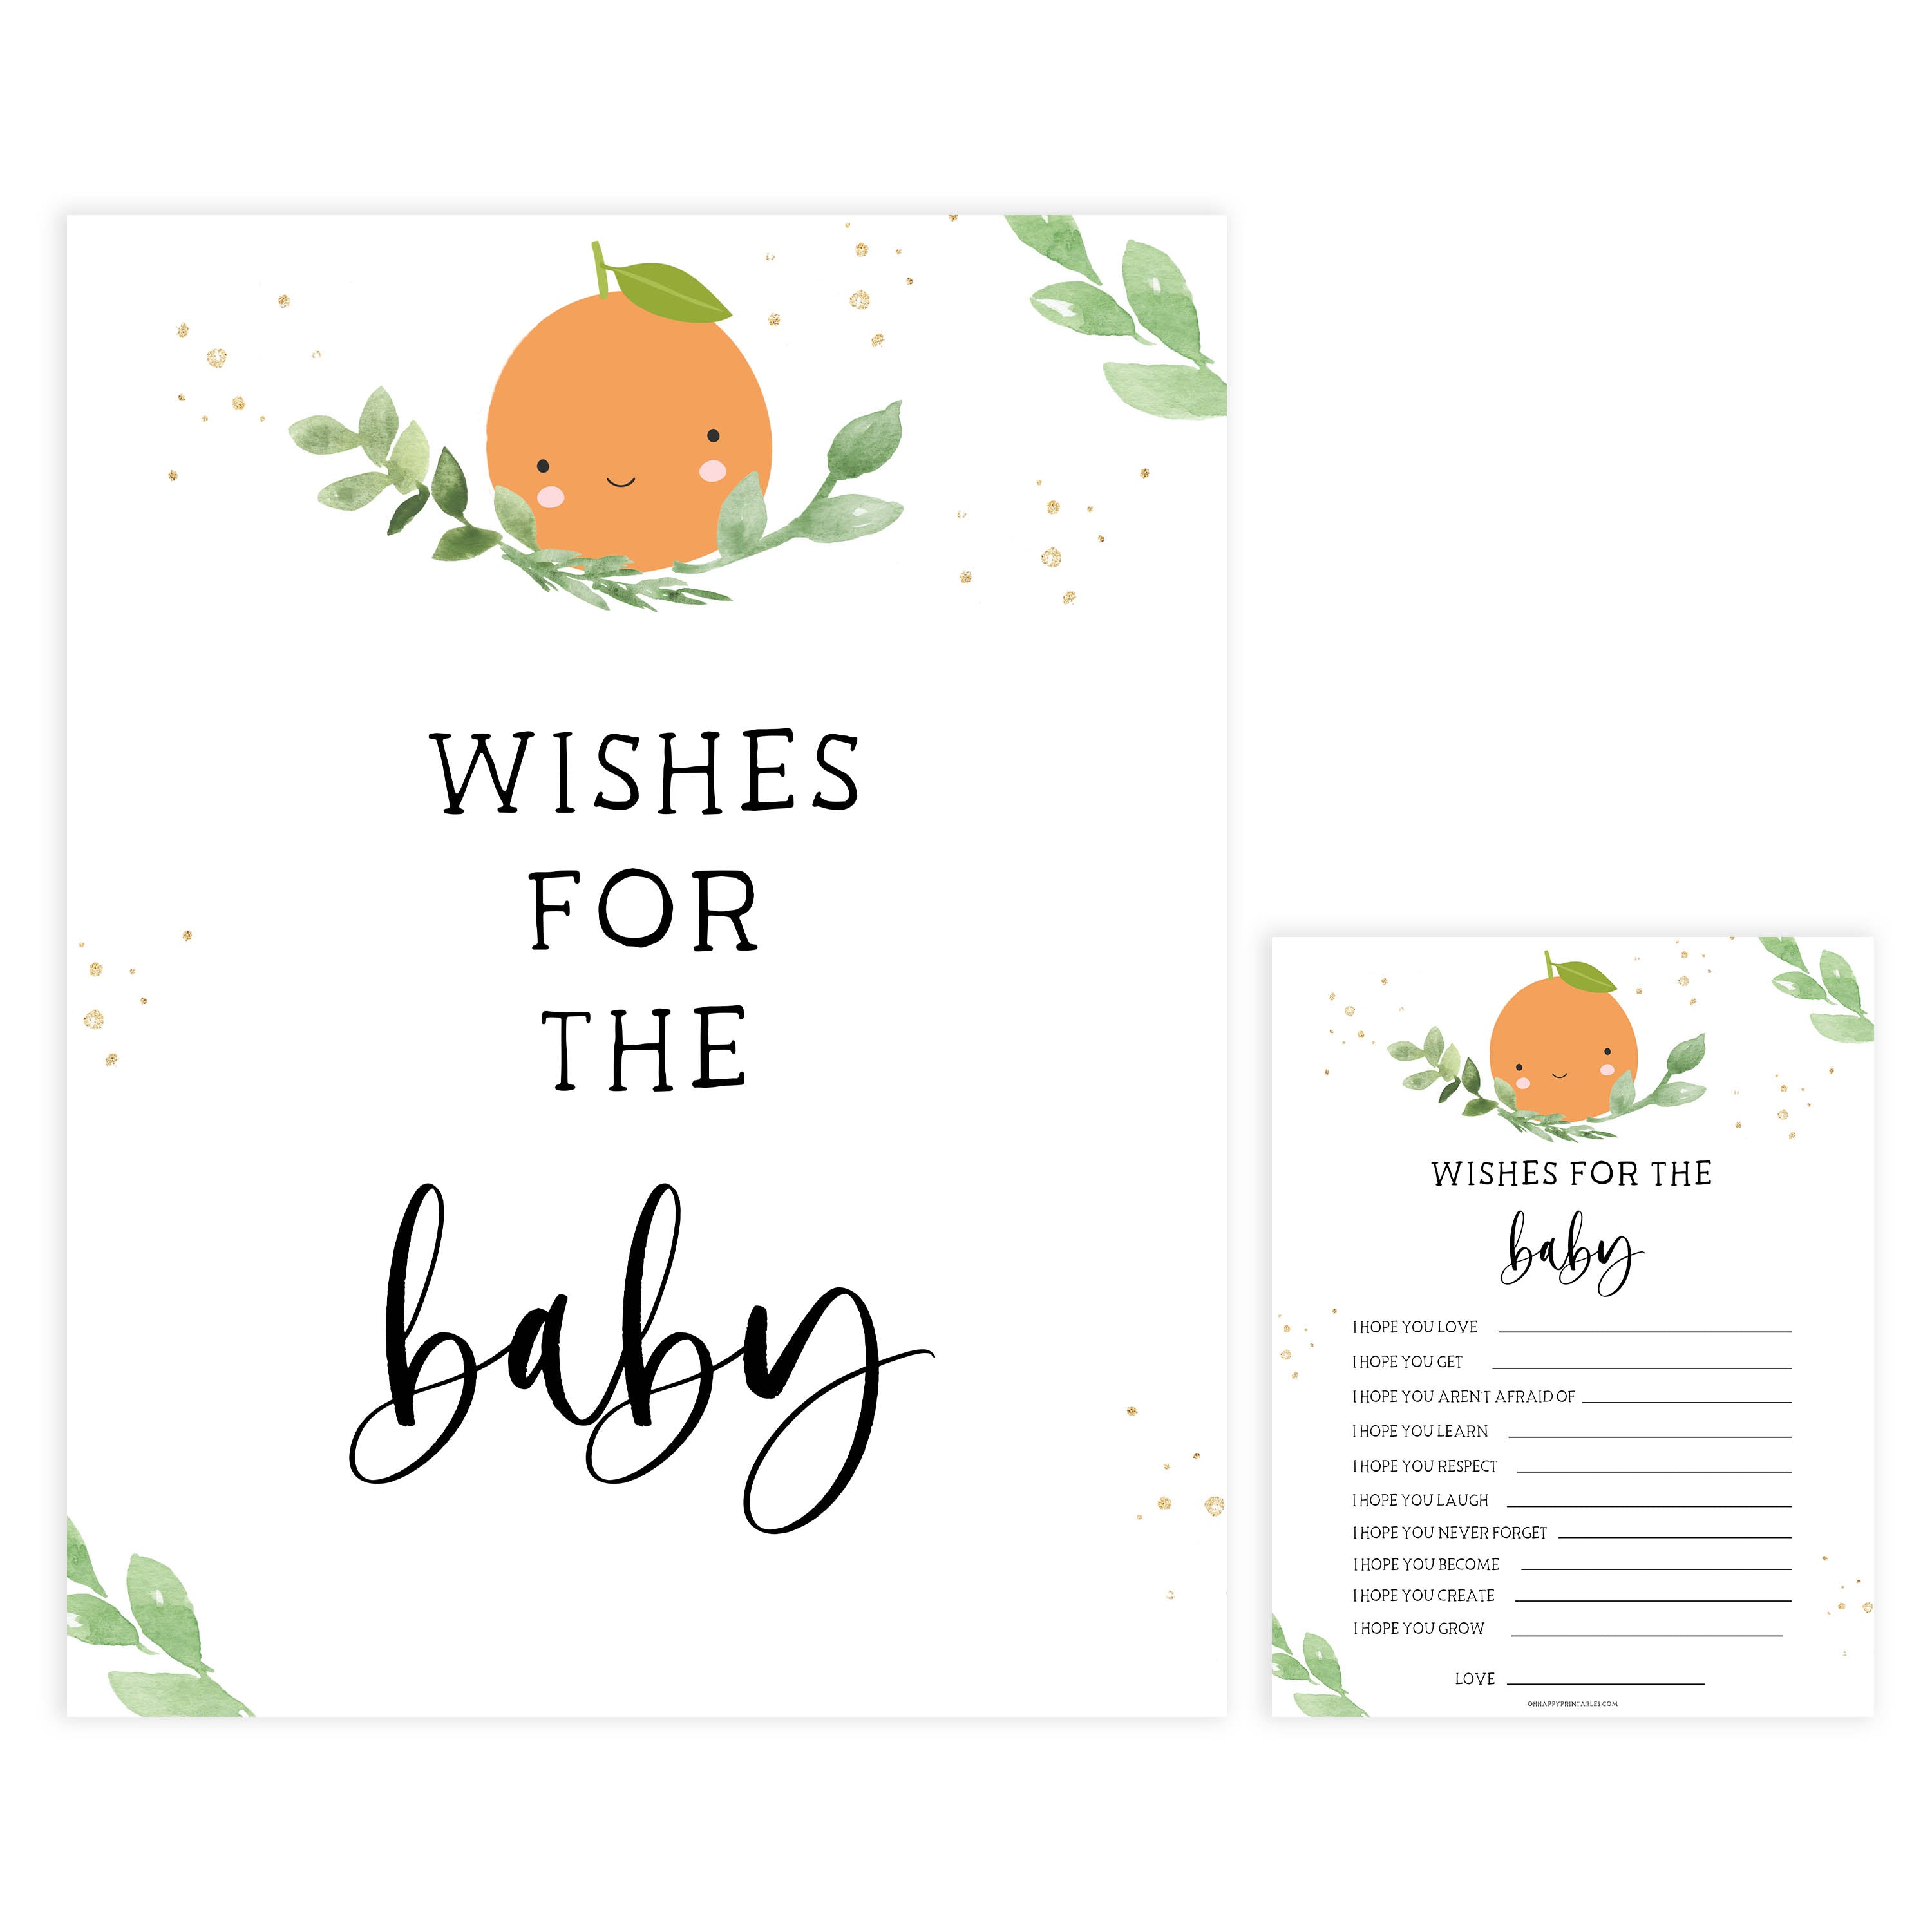 wishes for the baby keepsake, Printable baby shower games, little cutie baby games, baby shower games, fun baby shower ideas, top baby shower ideas, little cutie baby shower, baby shower games, fun little cutie baby shower ideas